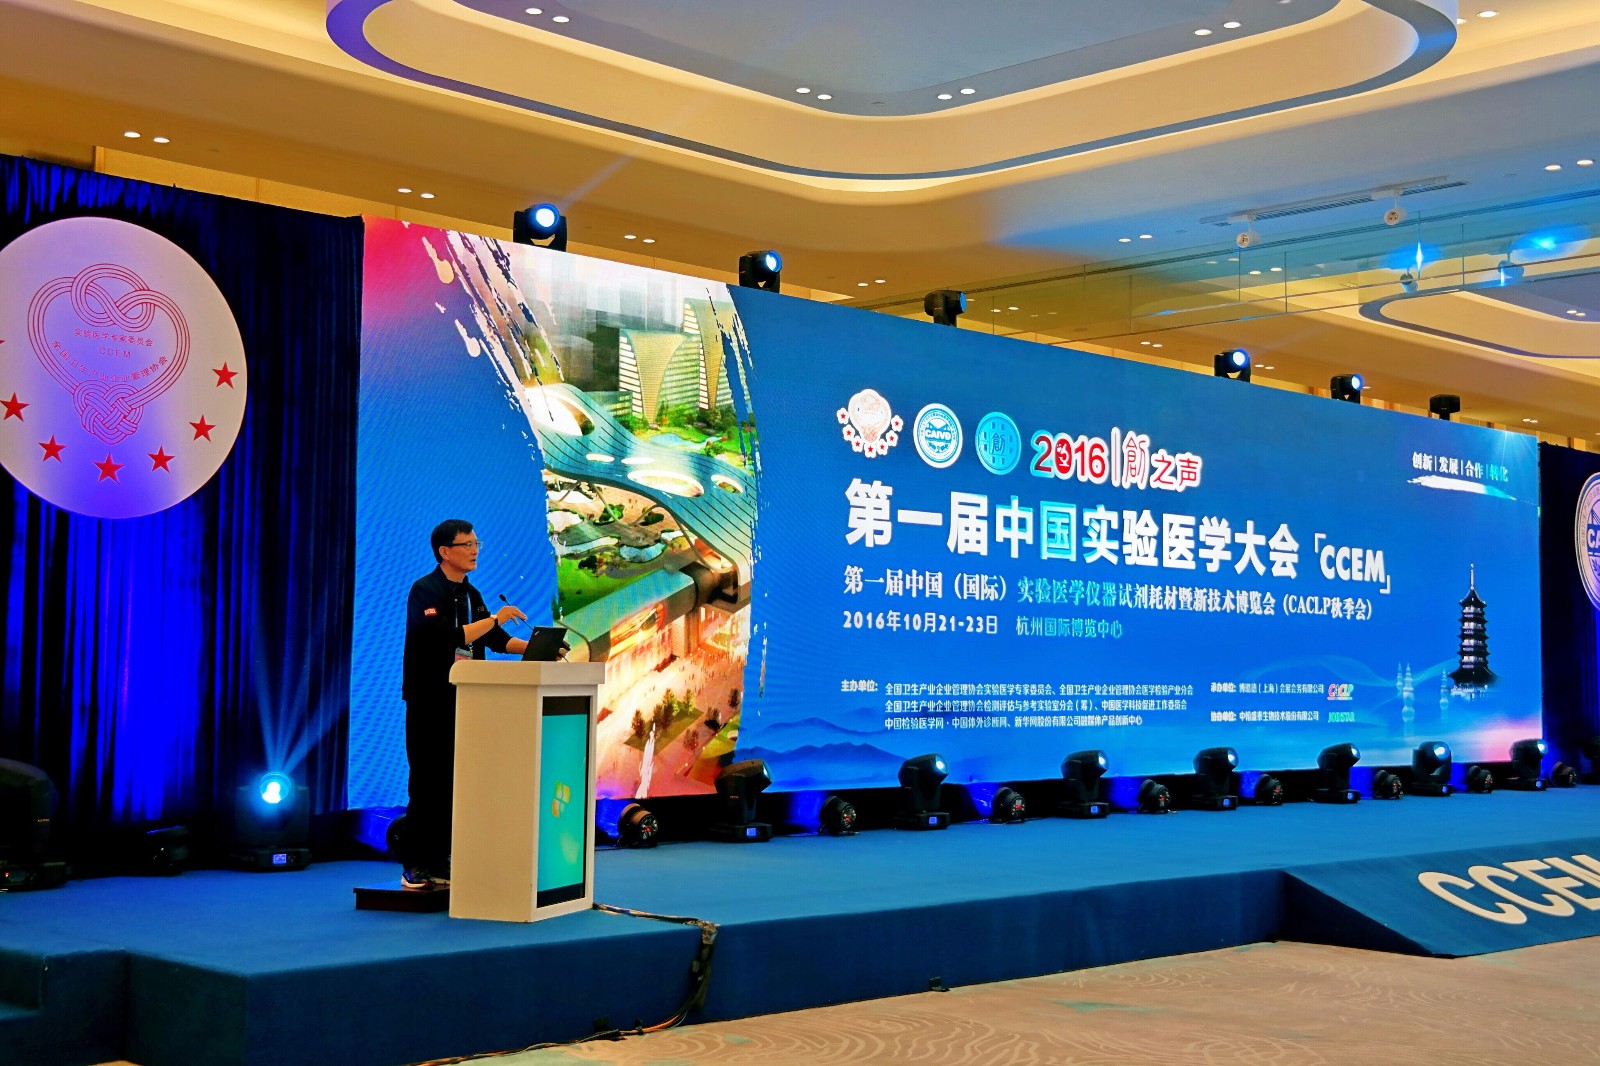 The 1th China Congress on Experimental Medicine (CCEM)